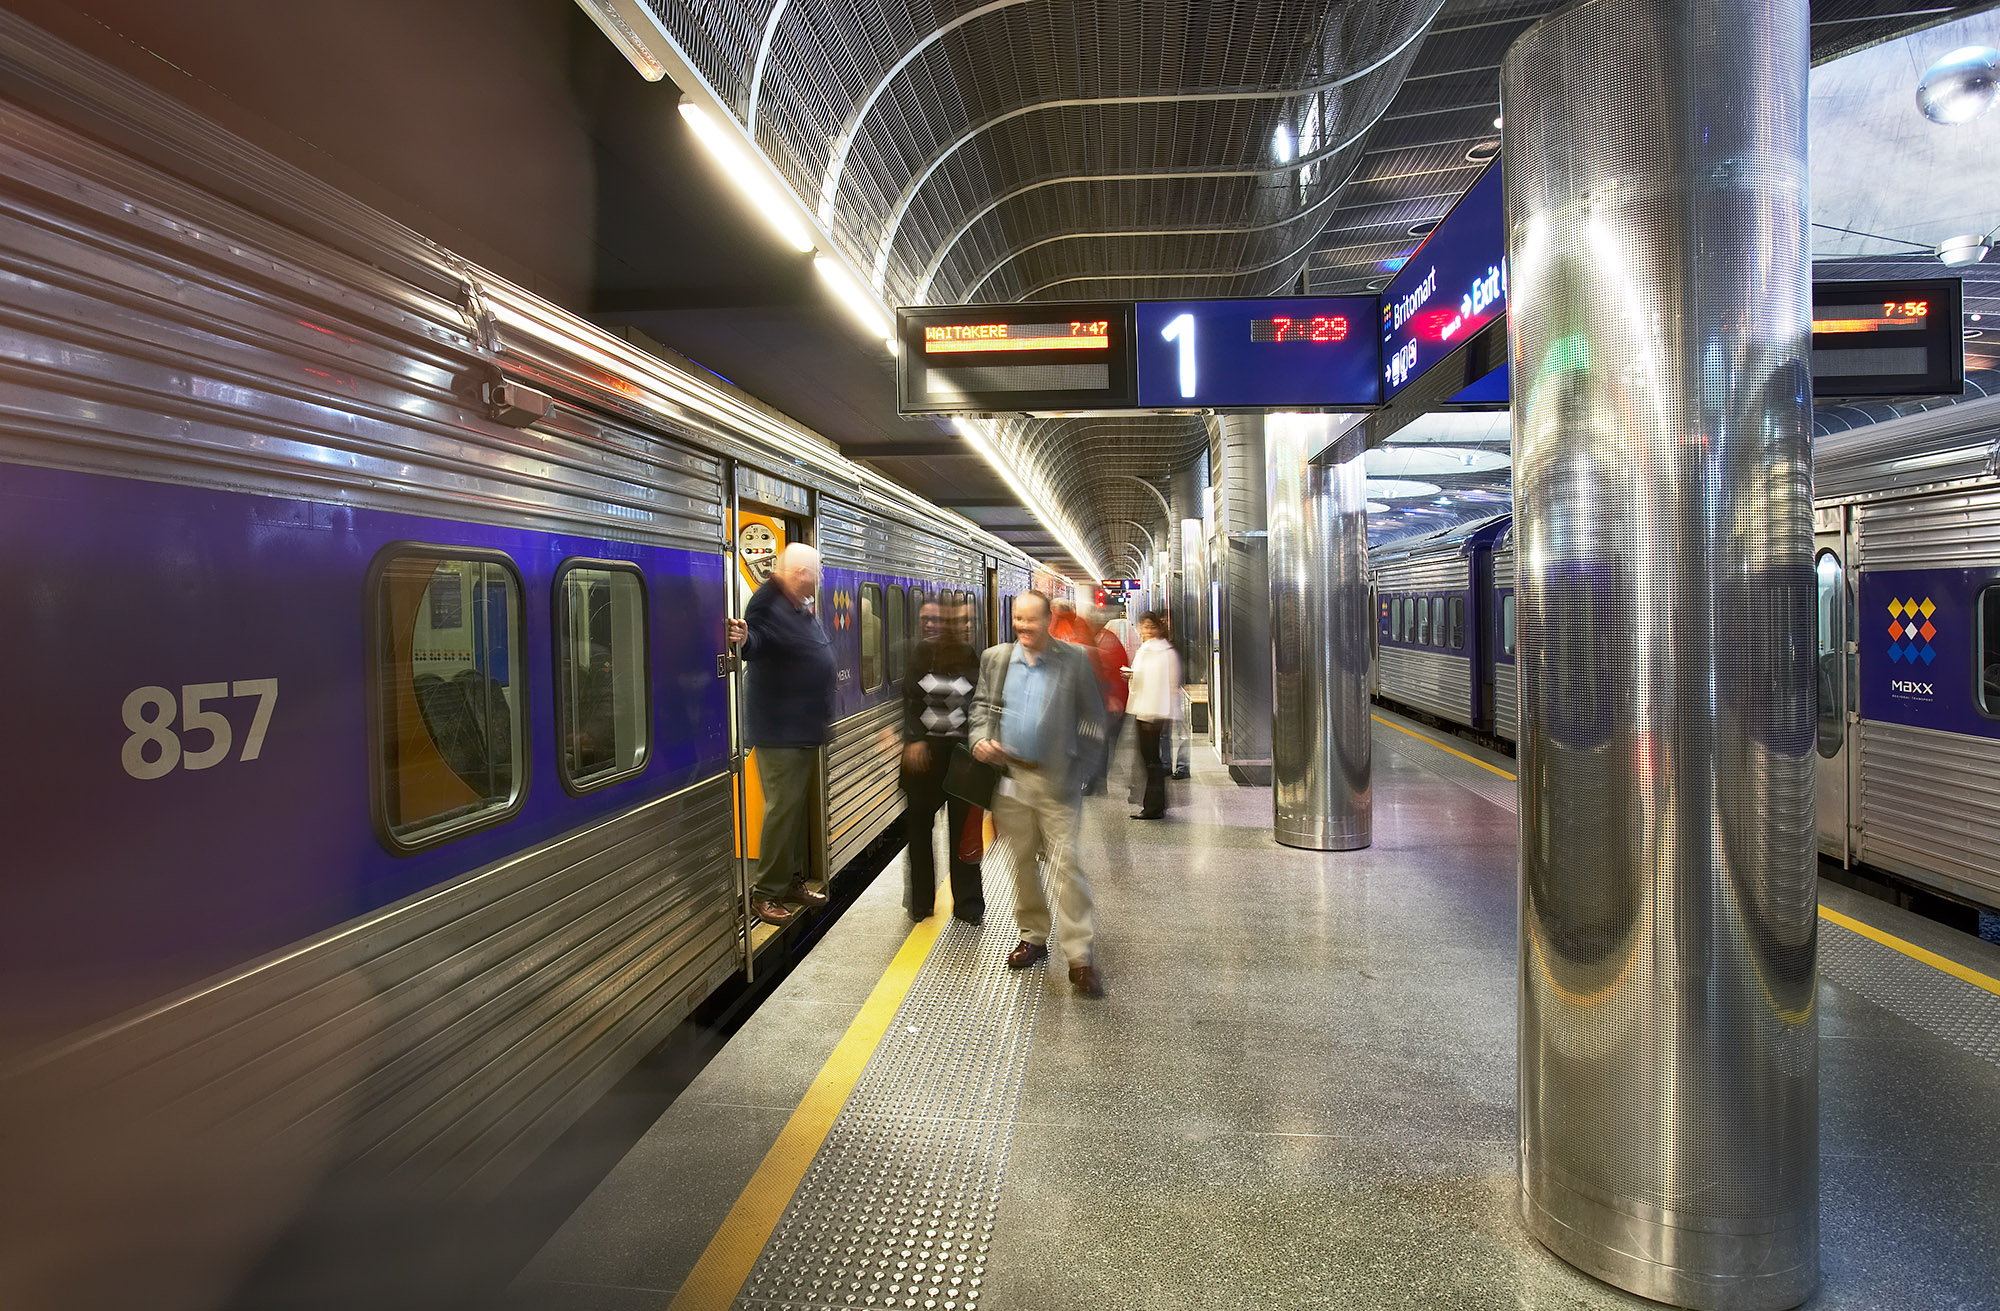 Passengers on platform at Britomart Station with man on left exiting a train